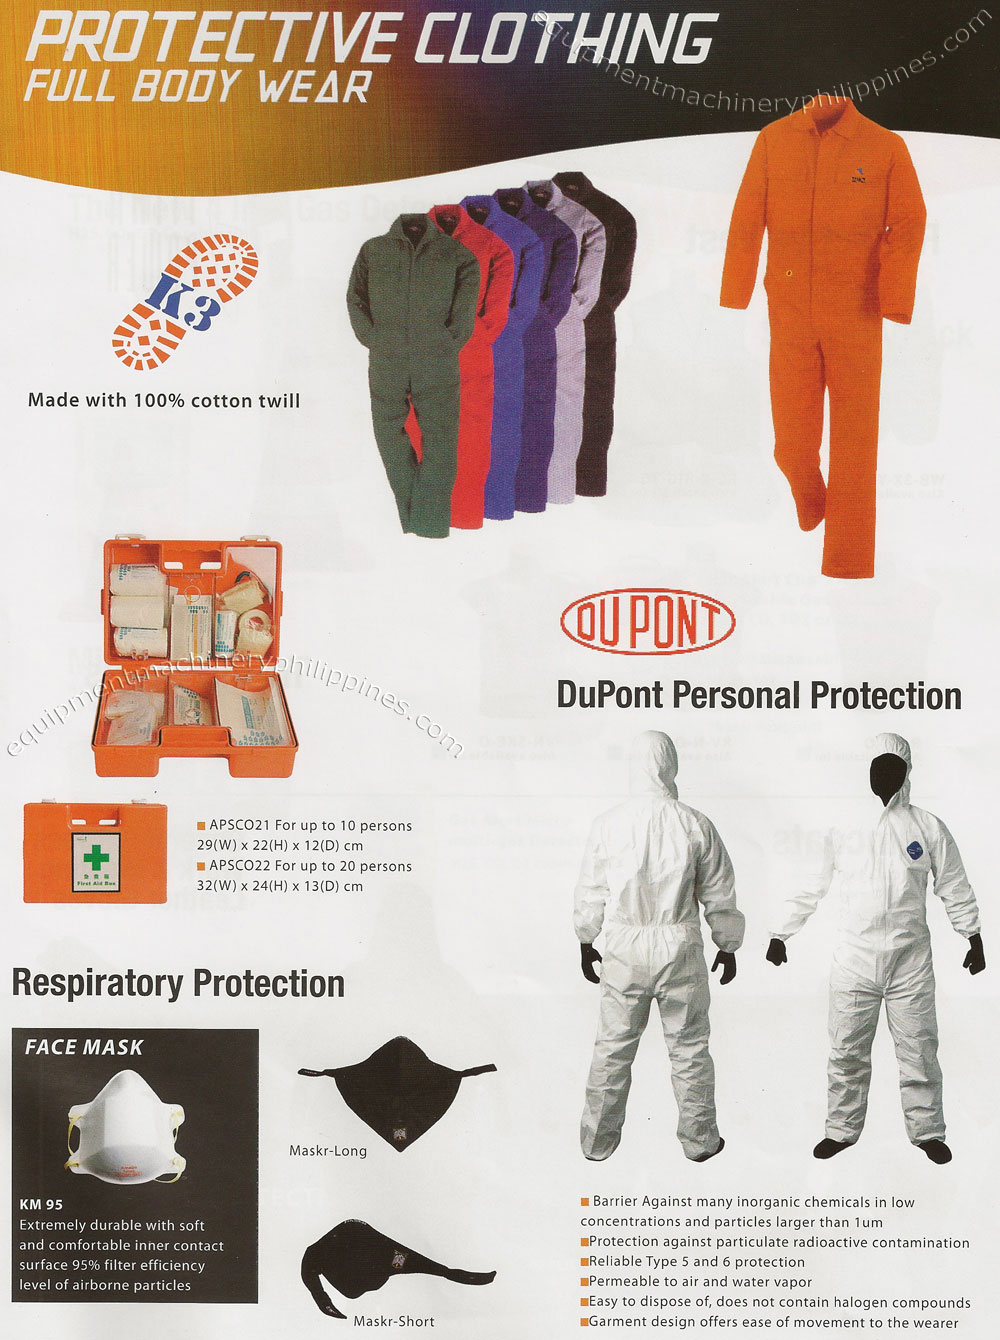 Full Body Protective Clothing, Respiratory Protection